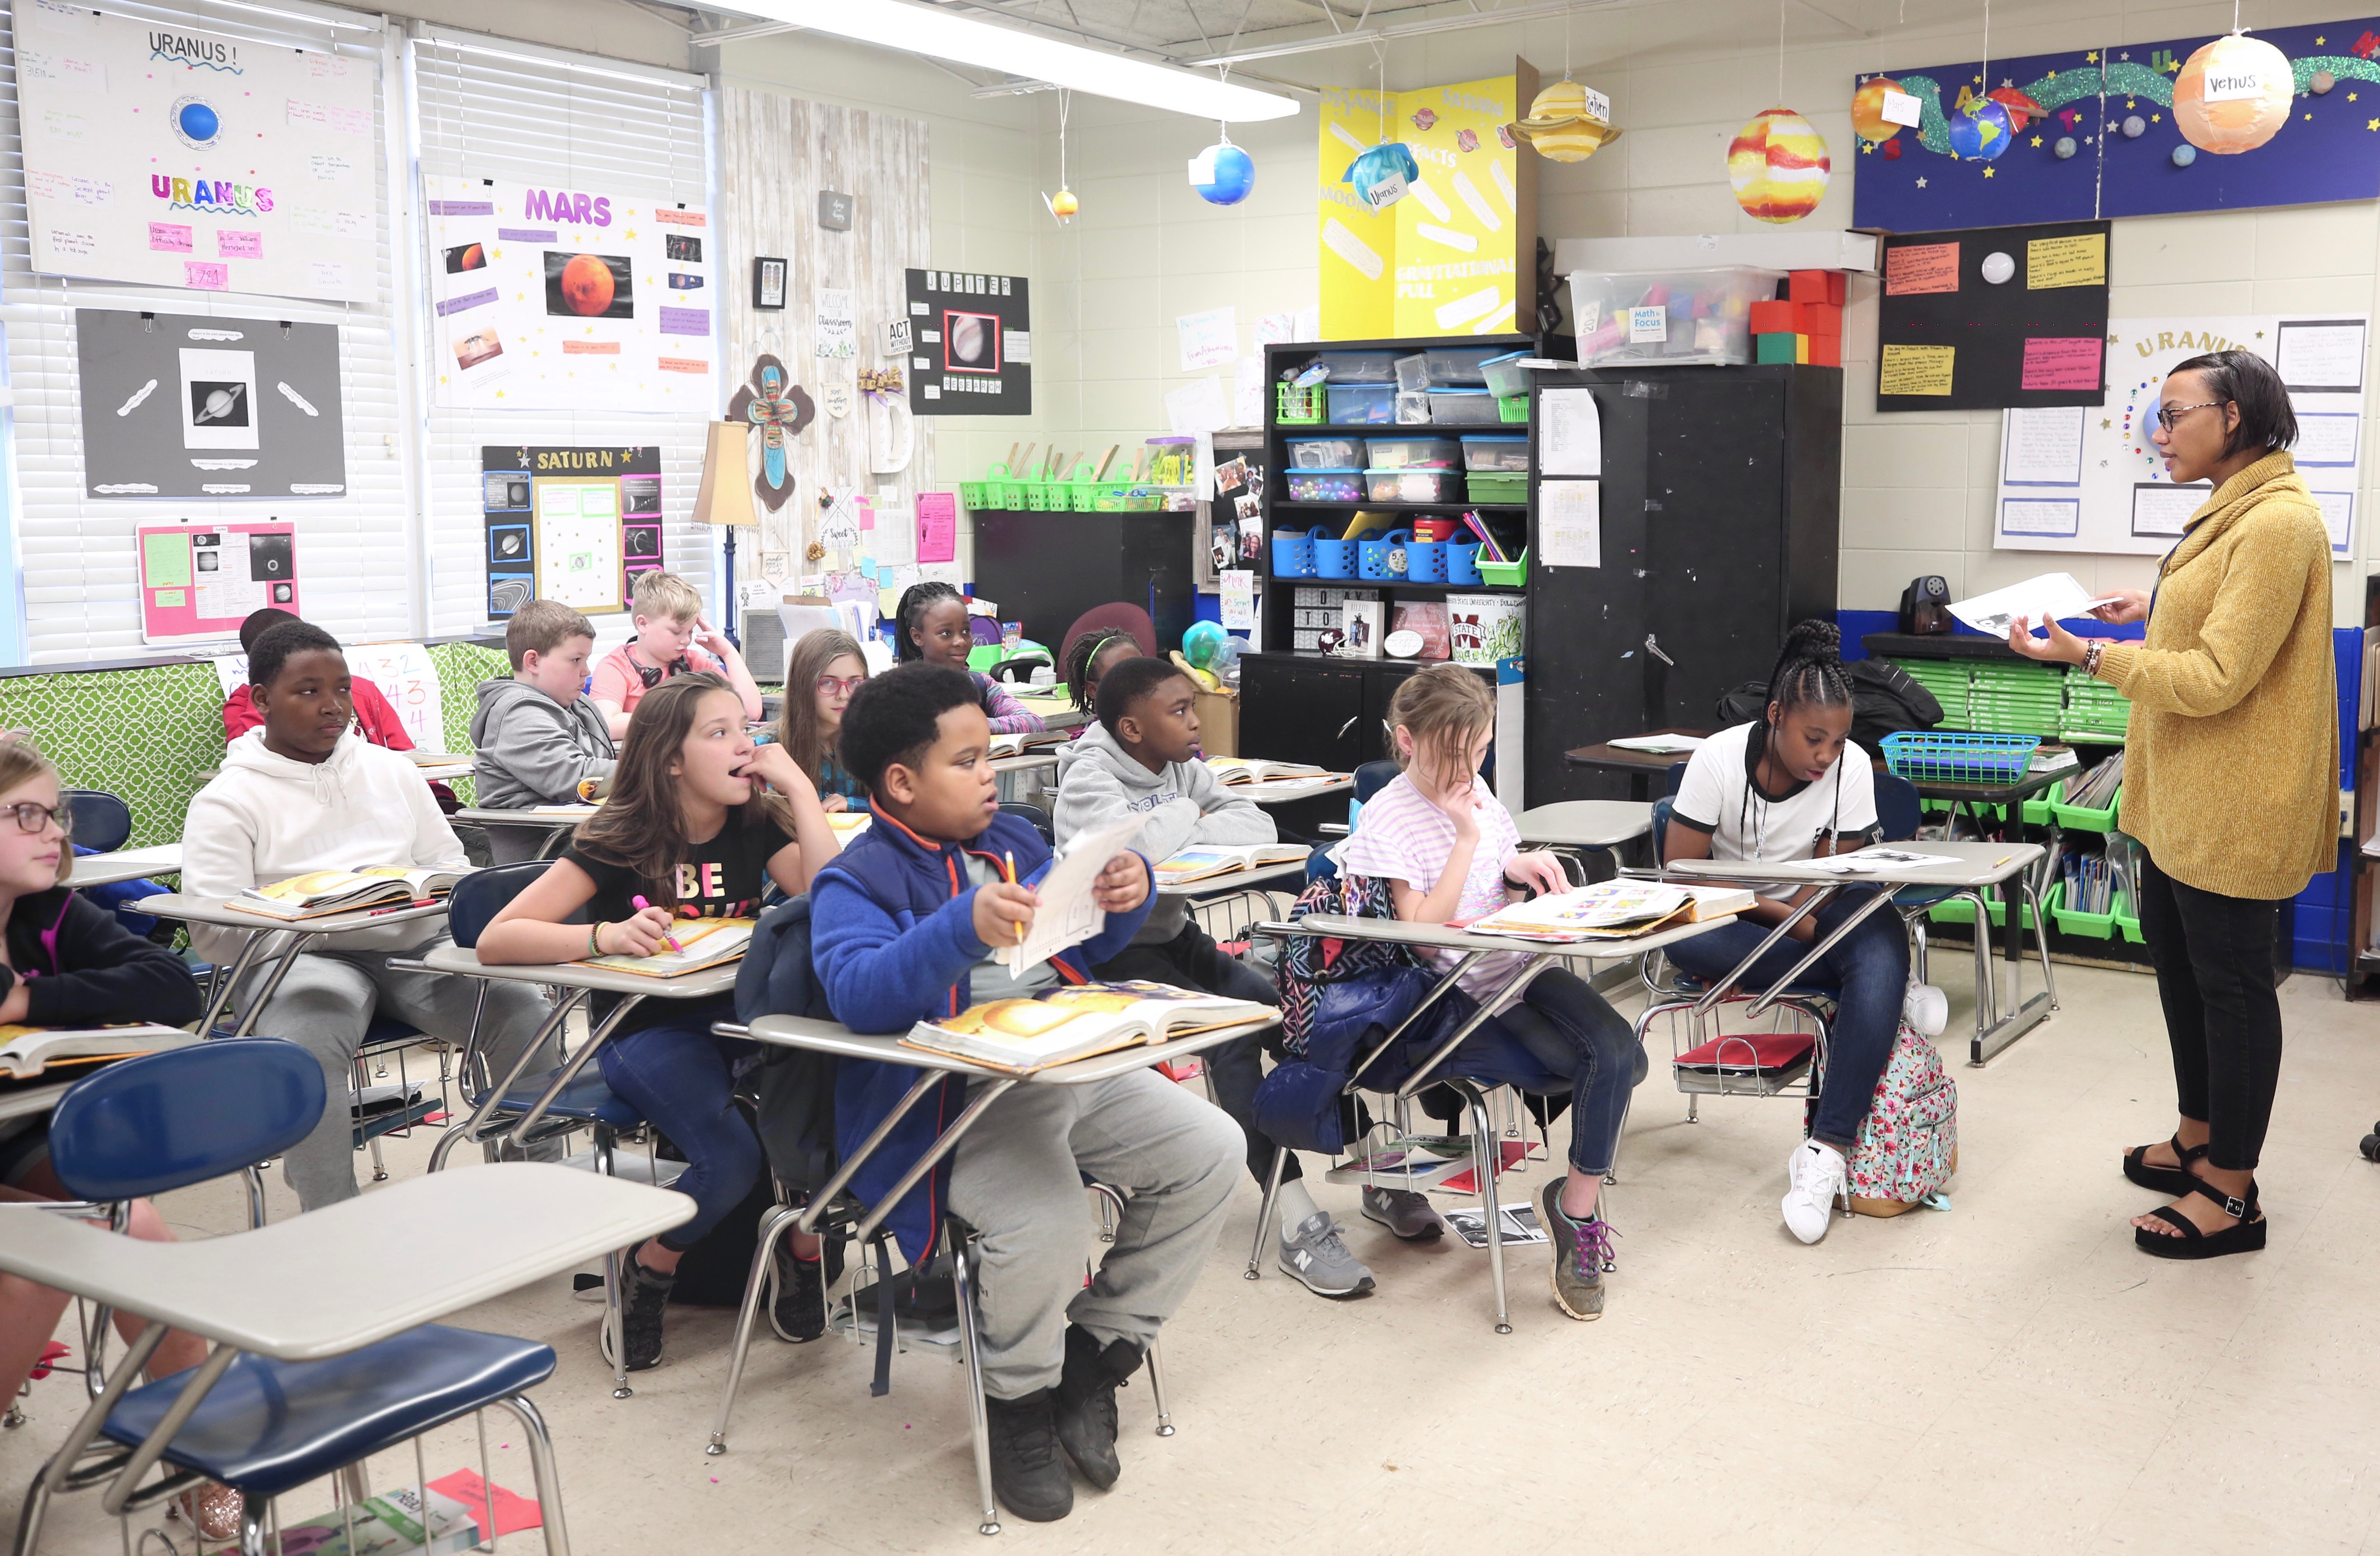 Dre'Anna Davis, a fifth grade teacher at Quitman Upper Elementary works with students in her classroom. (Photo provided by Quitman School District)